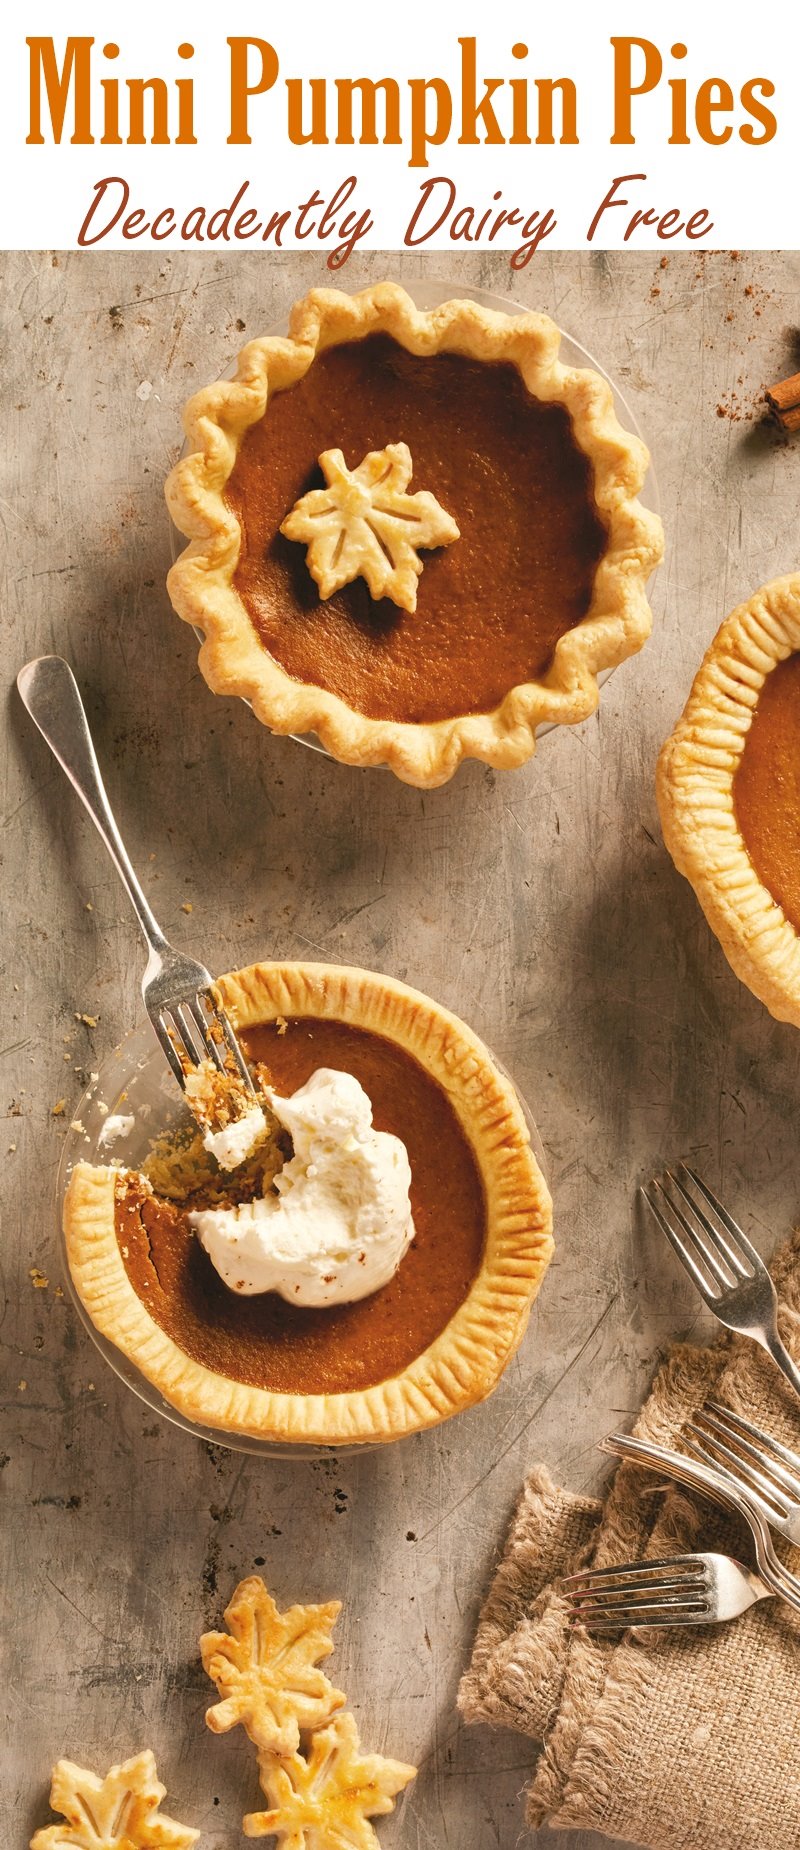 Mini Dairy-Free Pumpkin Pies Recipe - Personal desserts complete with homemade filling and crust!